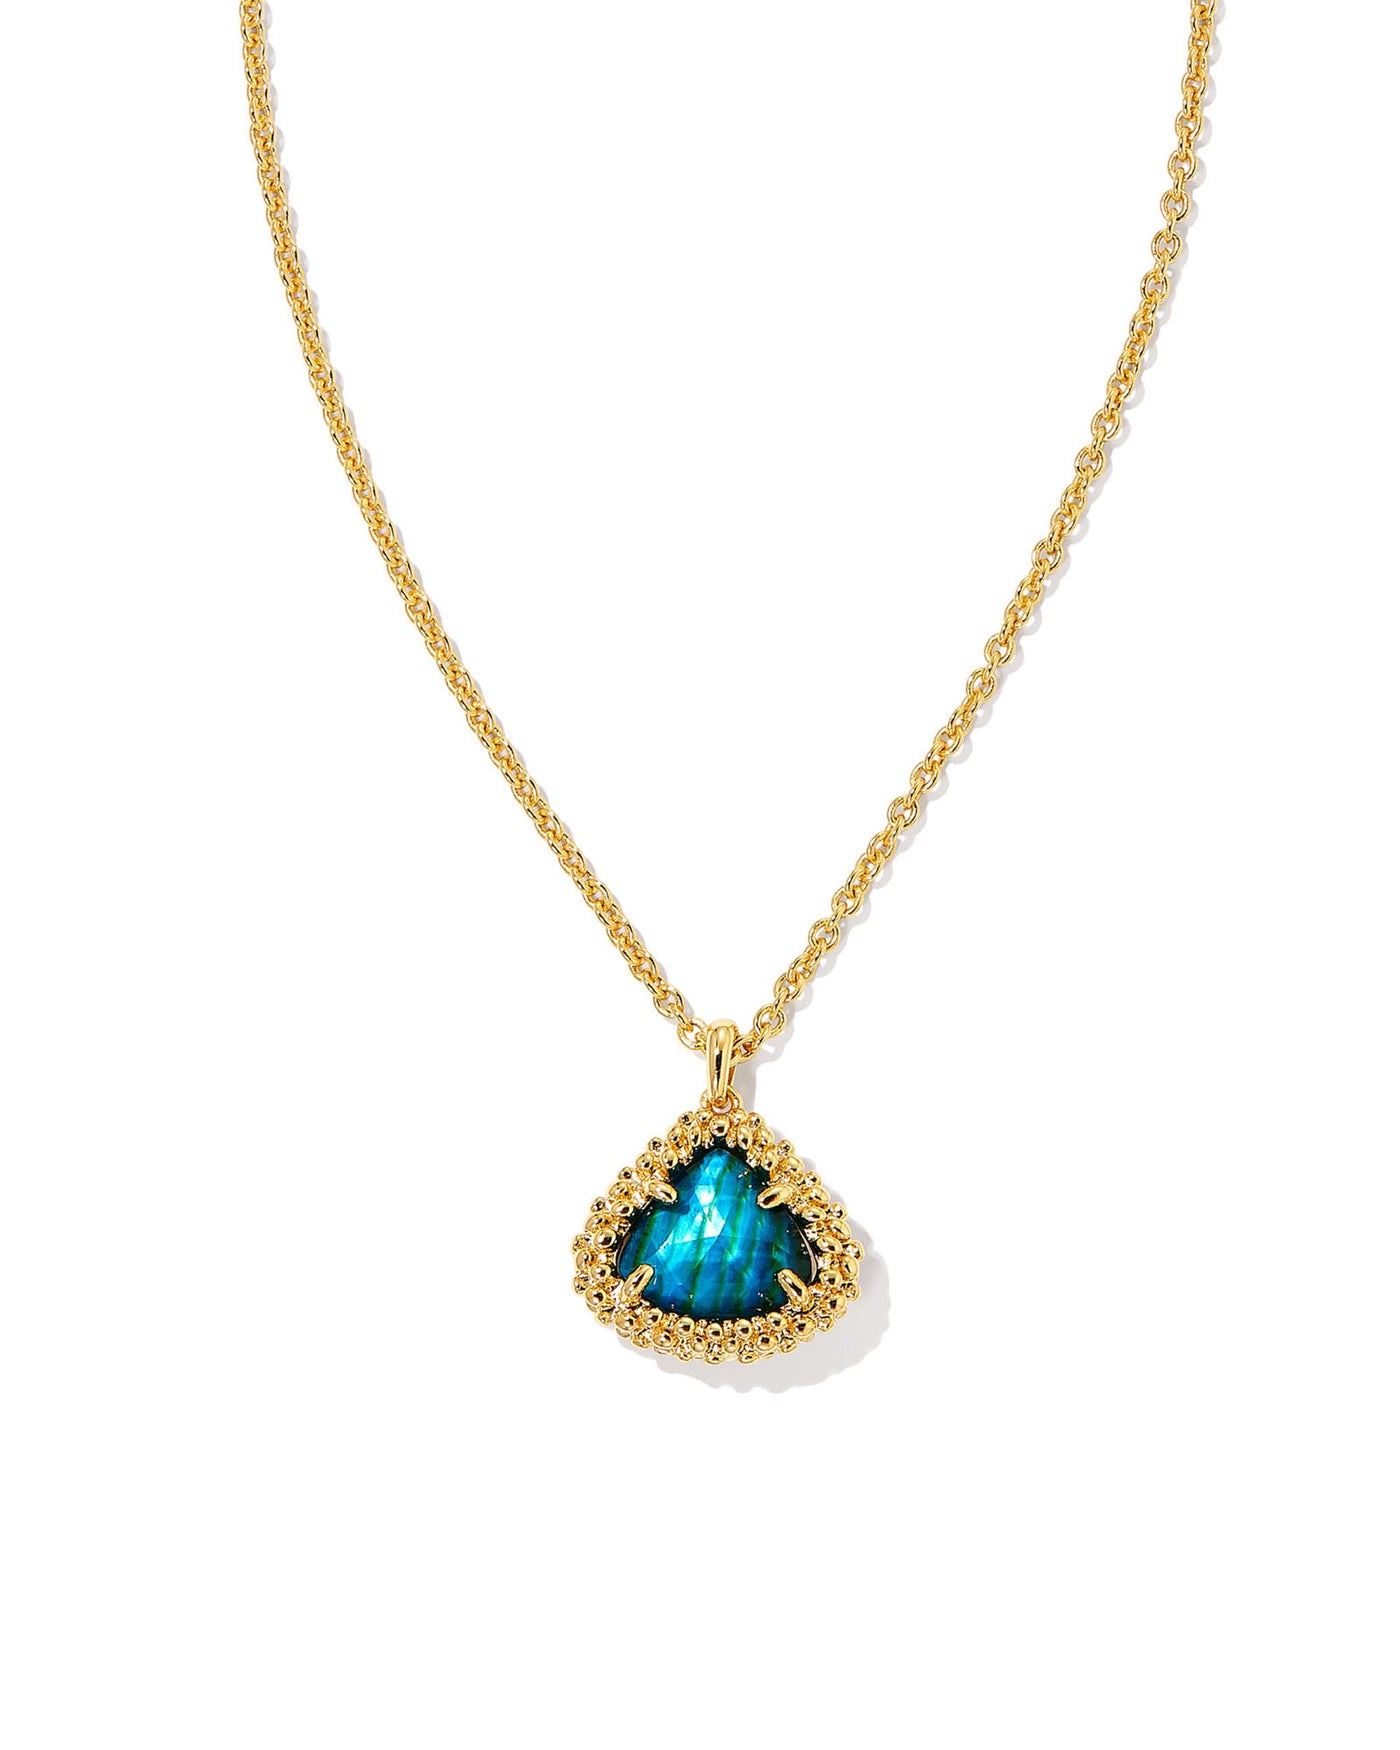 Gold Tone Necklace Featuring Teal Abalone by Kendra Scott